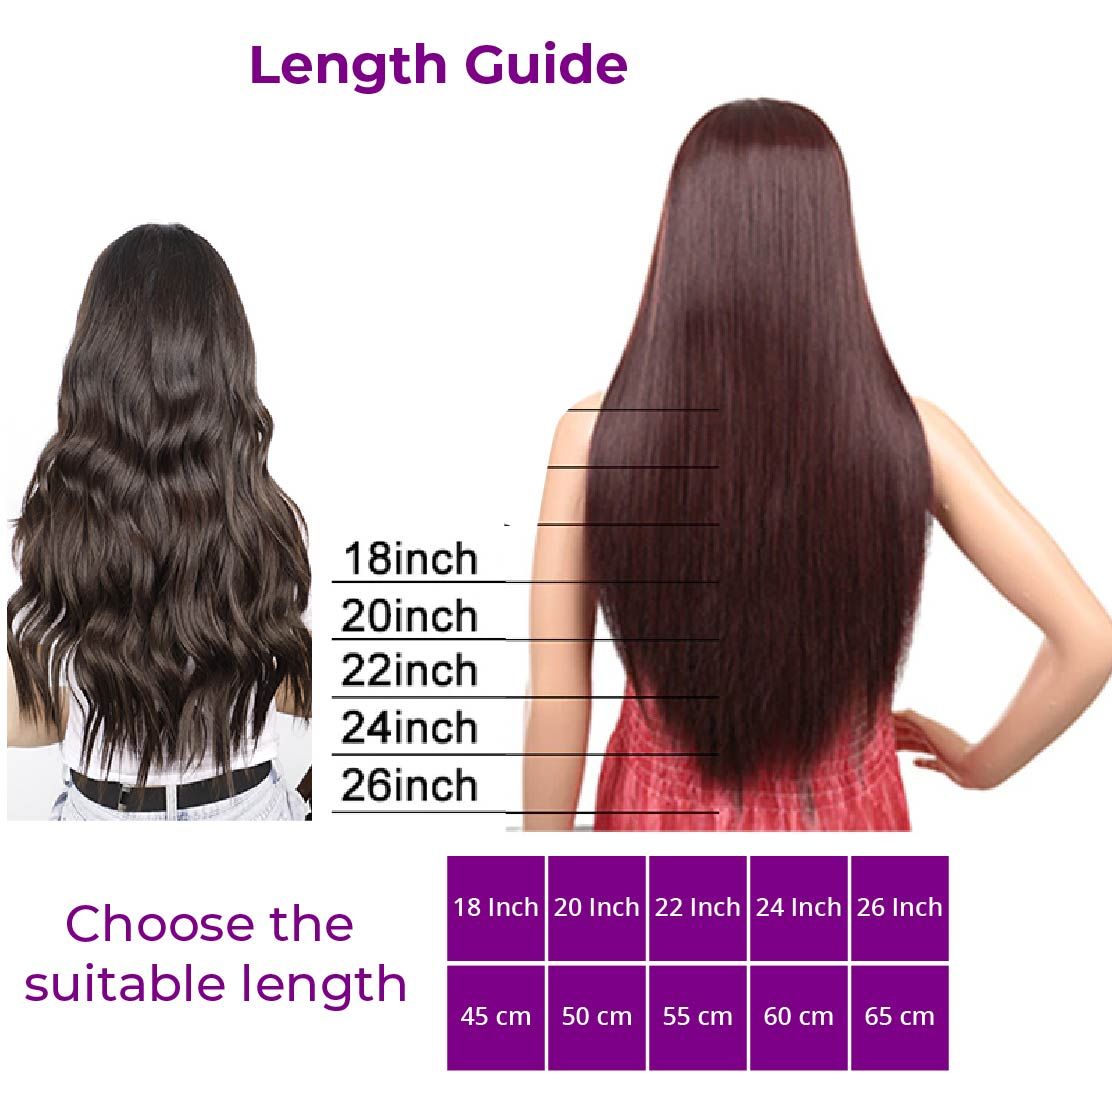 #6 Medium Brown 20" Deluxe Clip In Human Hair Extension - dulgehairextensions.com.au